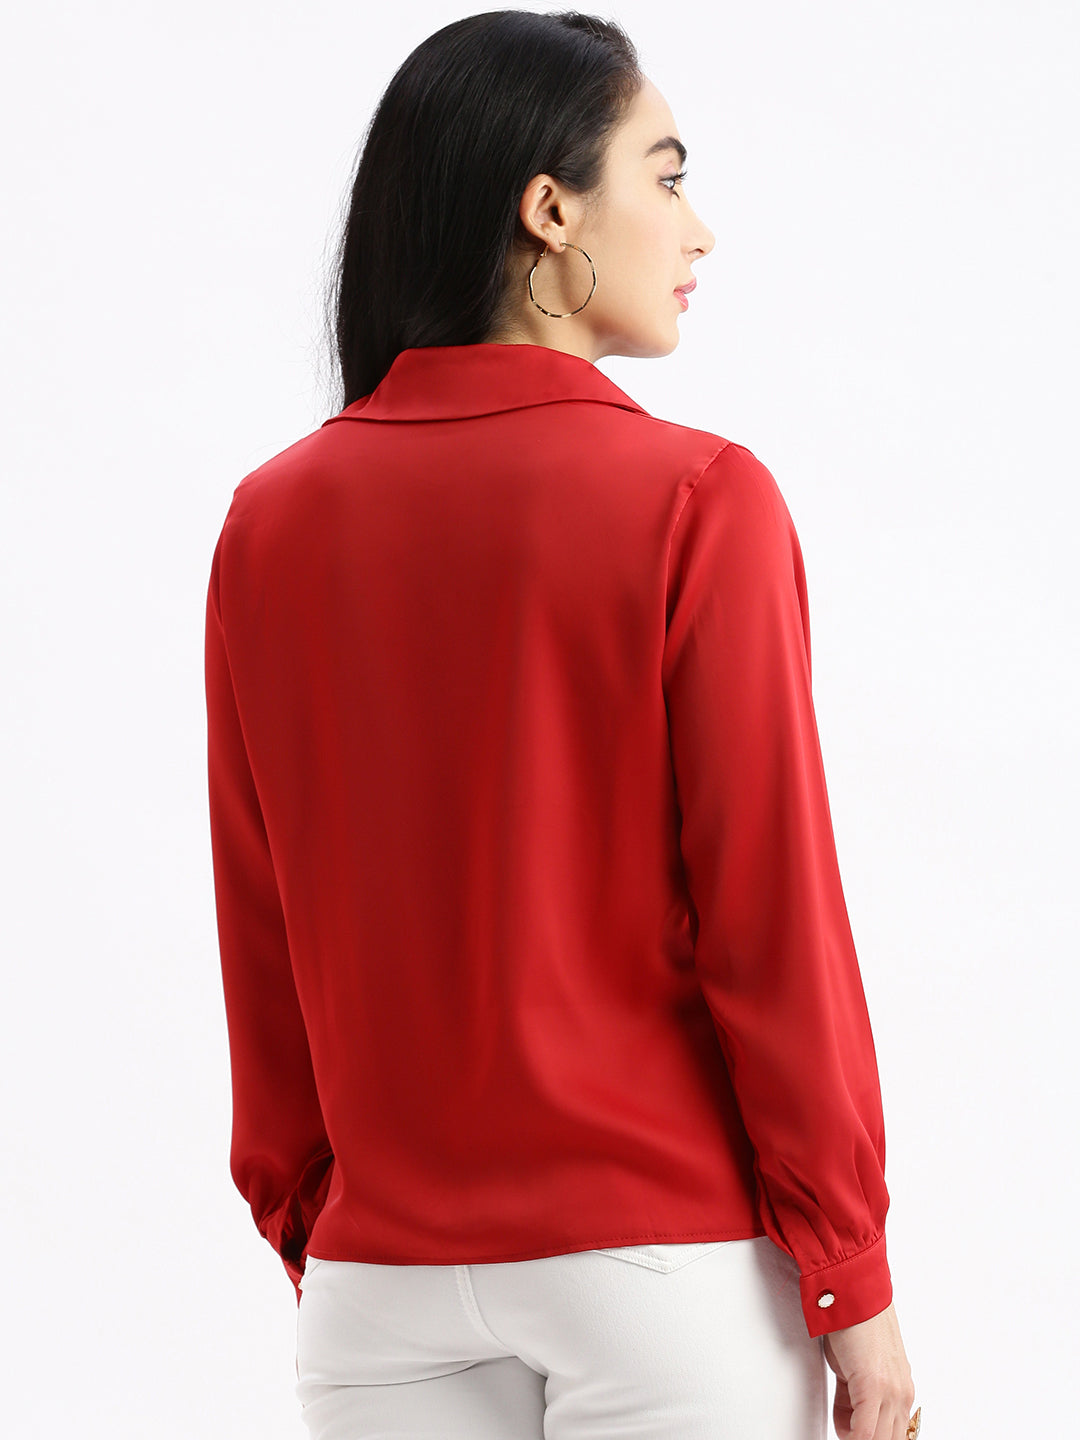 Women Solid Red Top with Neck Chain